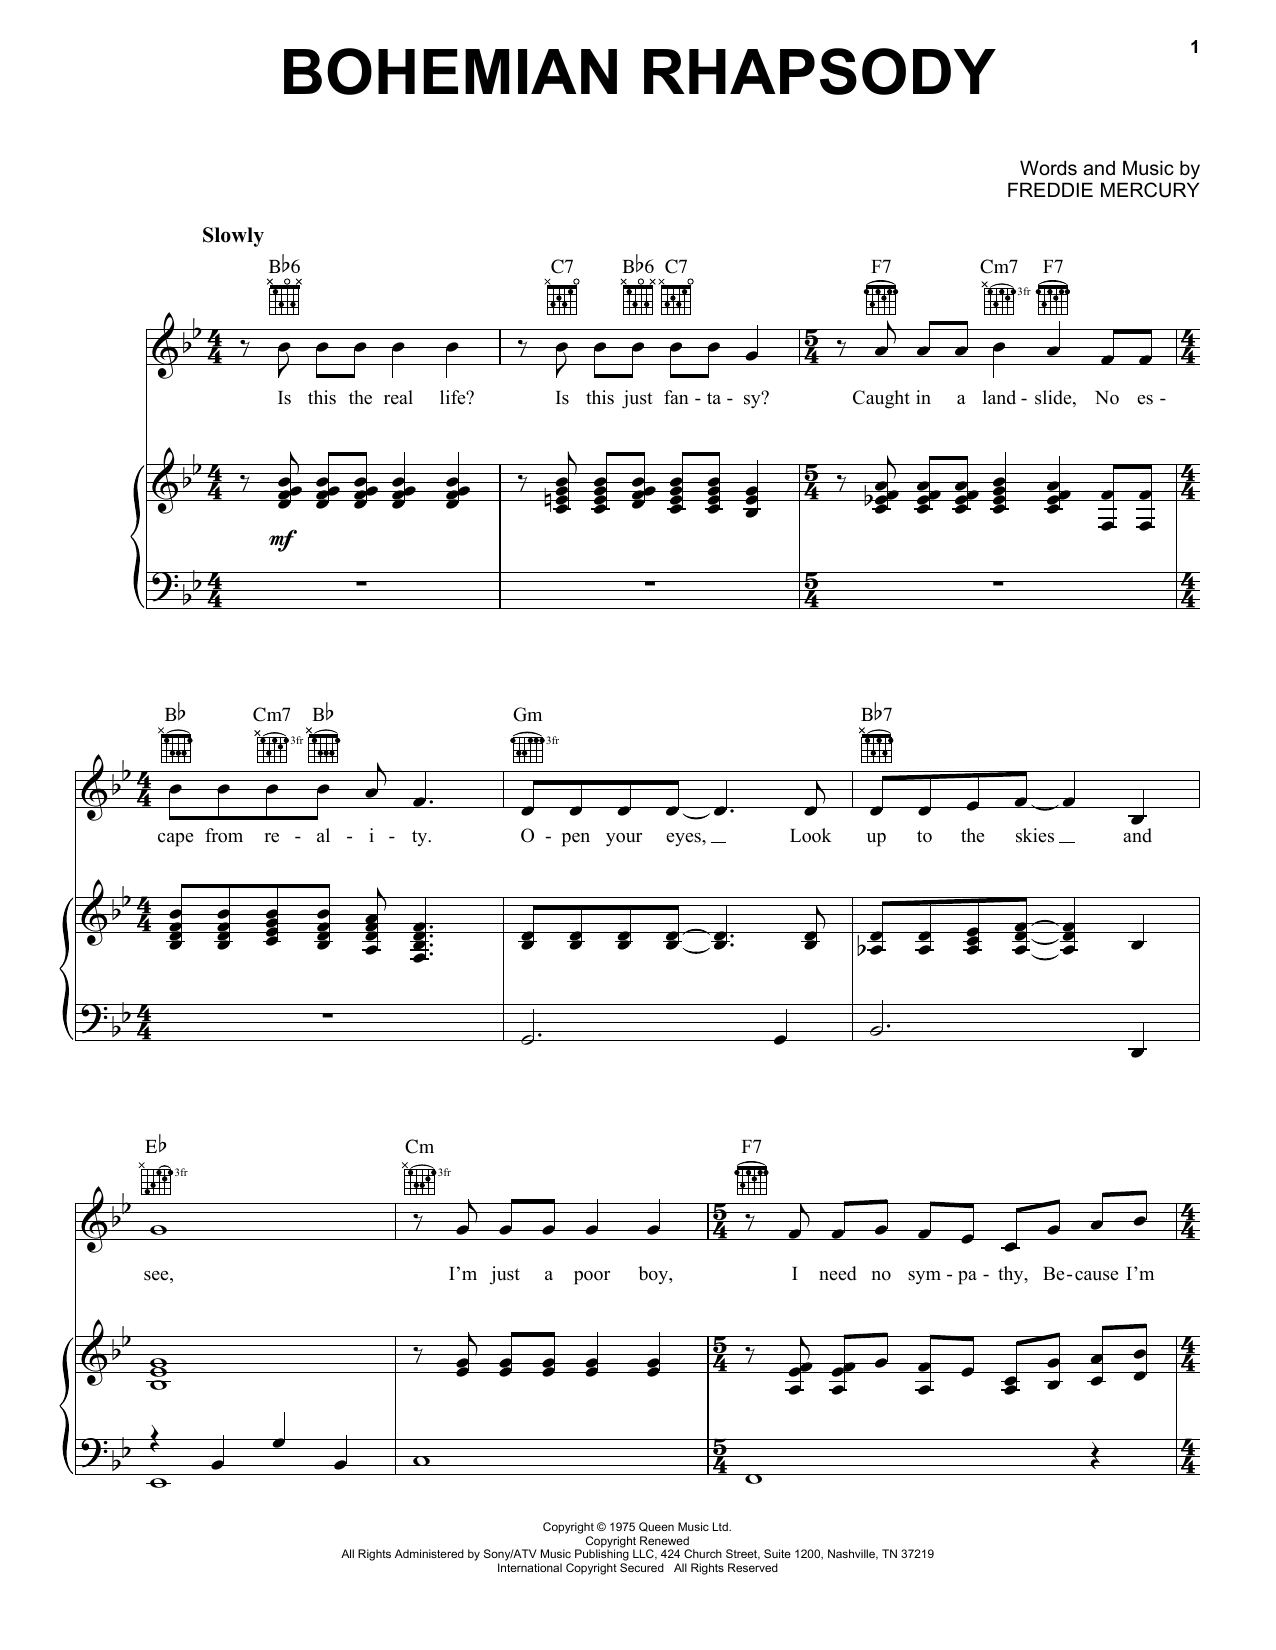 Queen Bohemian Rhapsody sheet music notes and chords. Download Printable PDF.